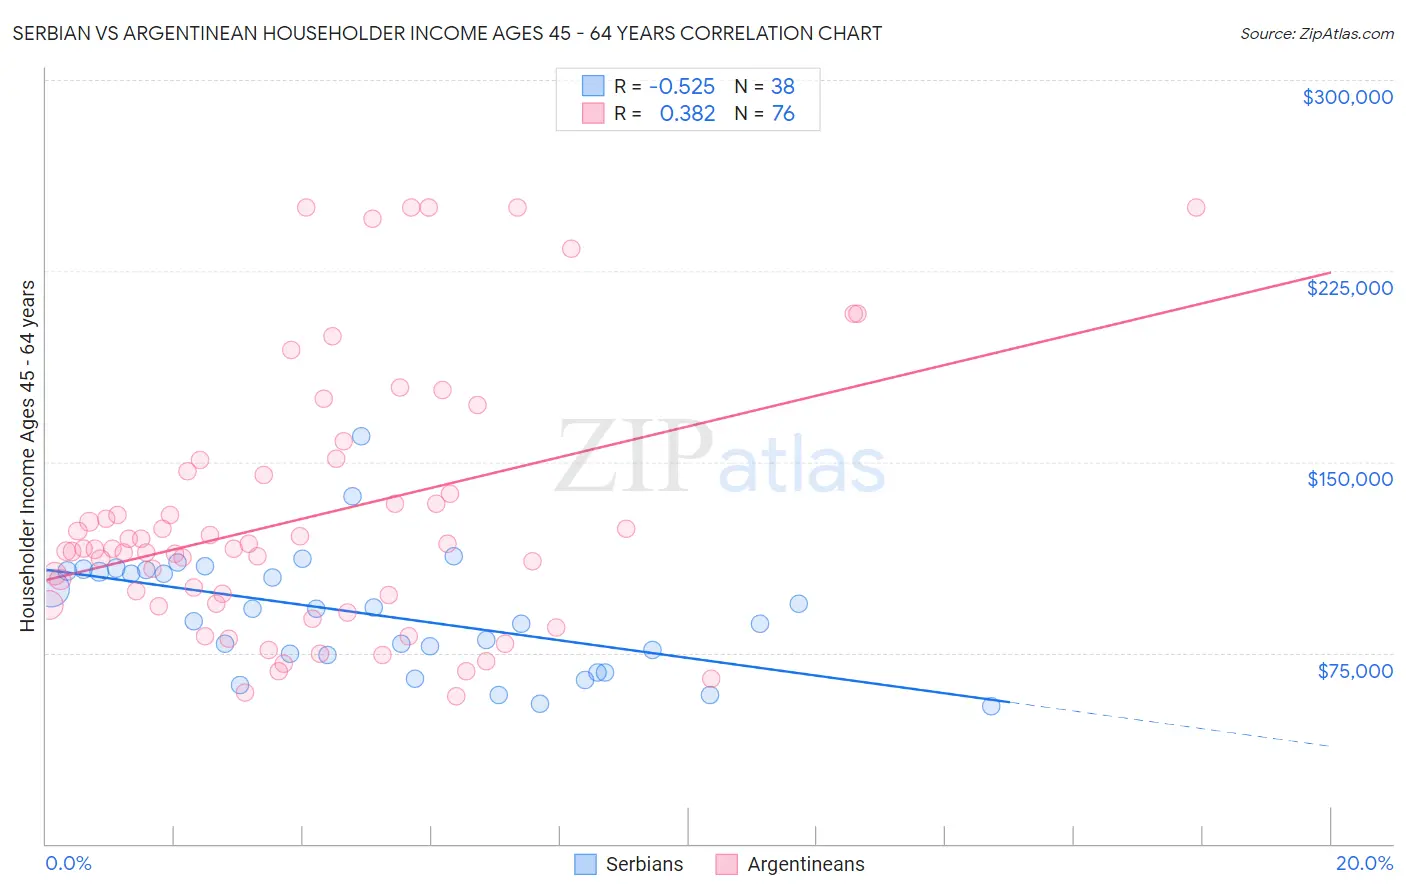 Serbian vs Argentinean Householder Income Ages 45 - 64 years